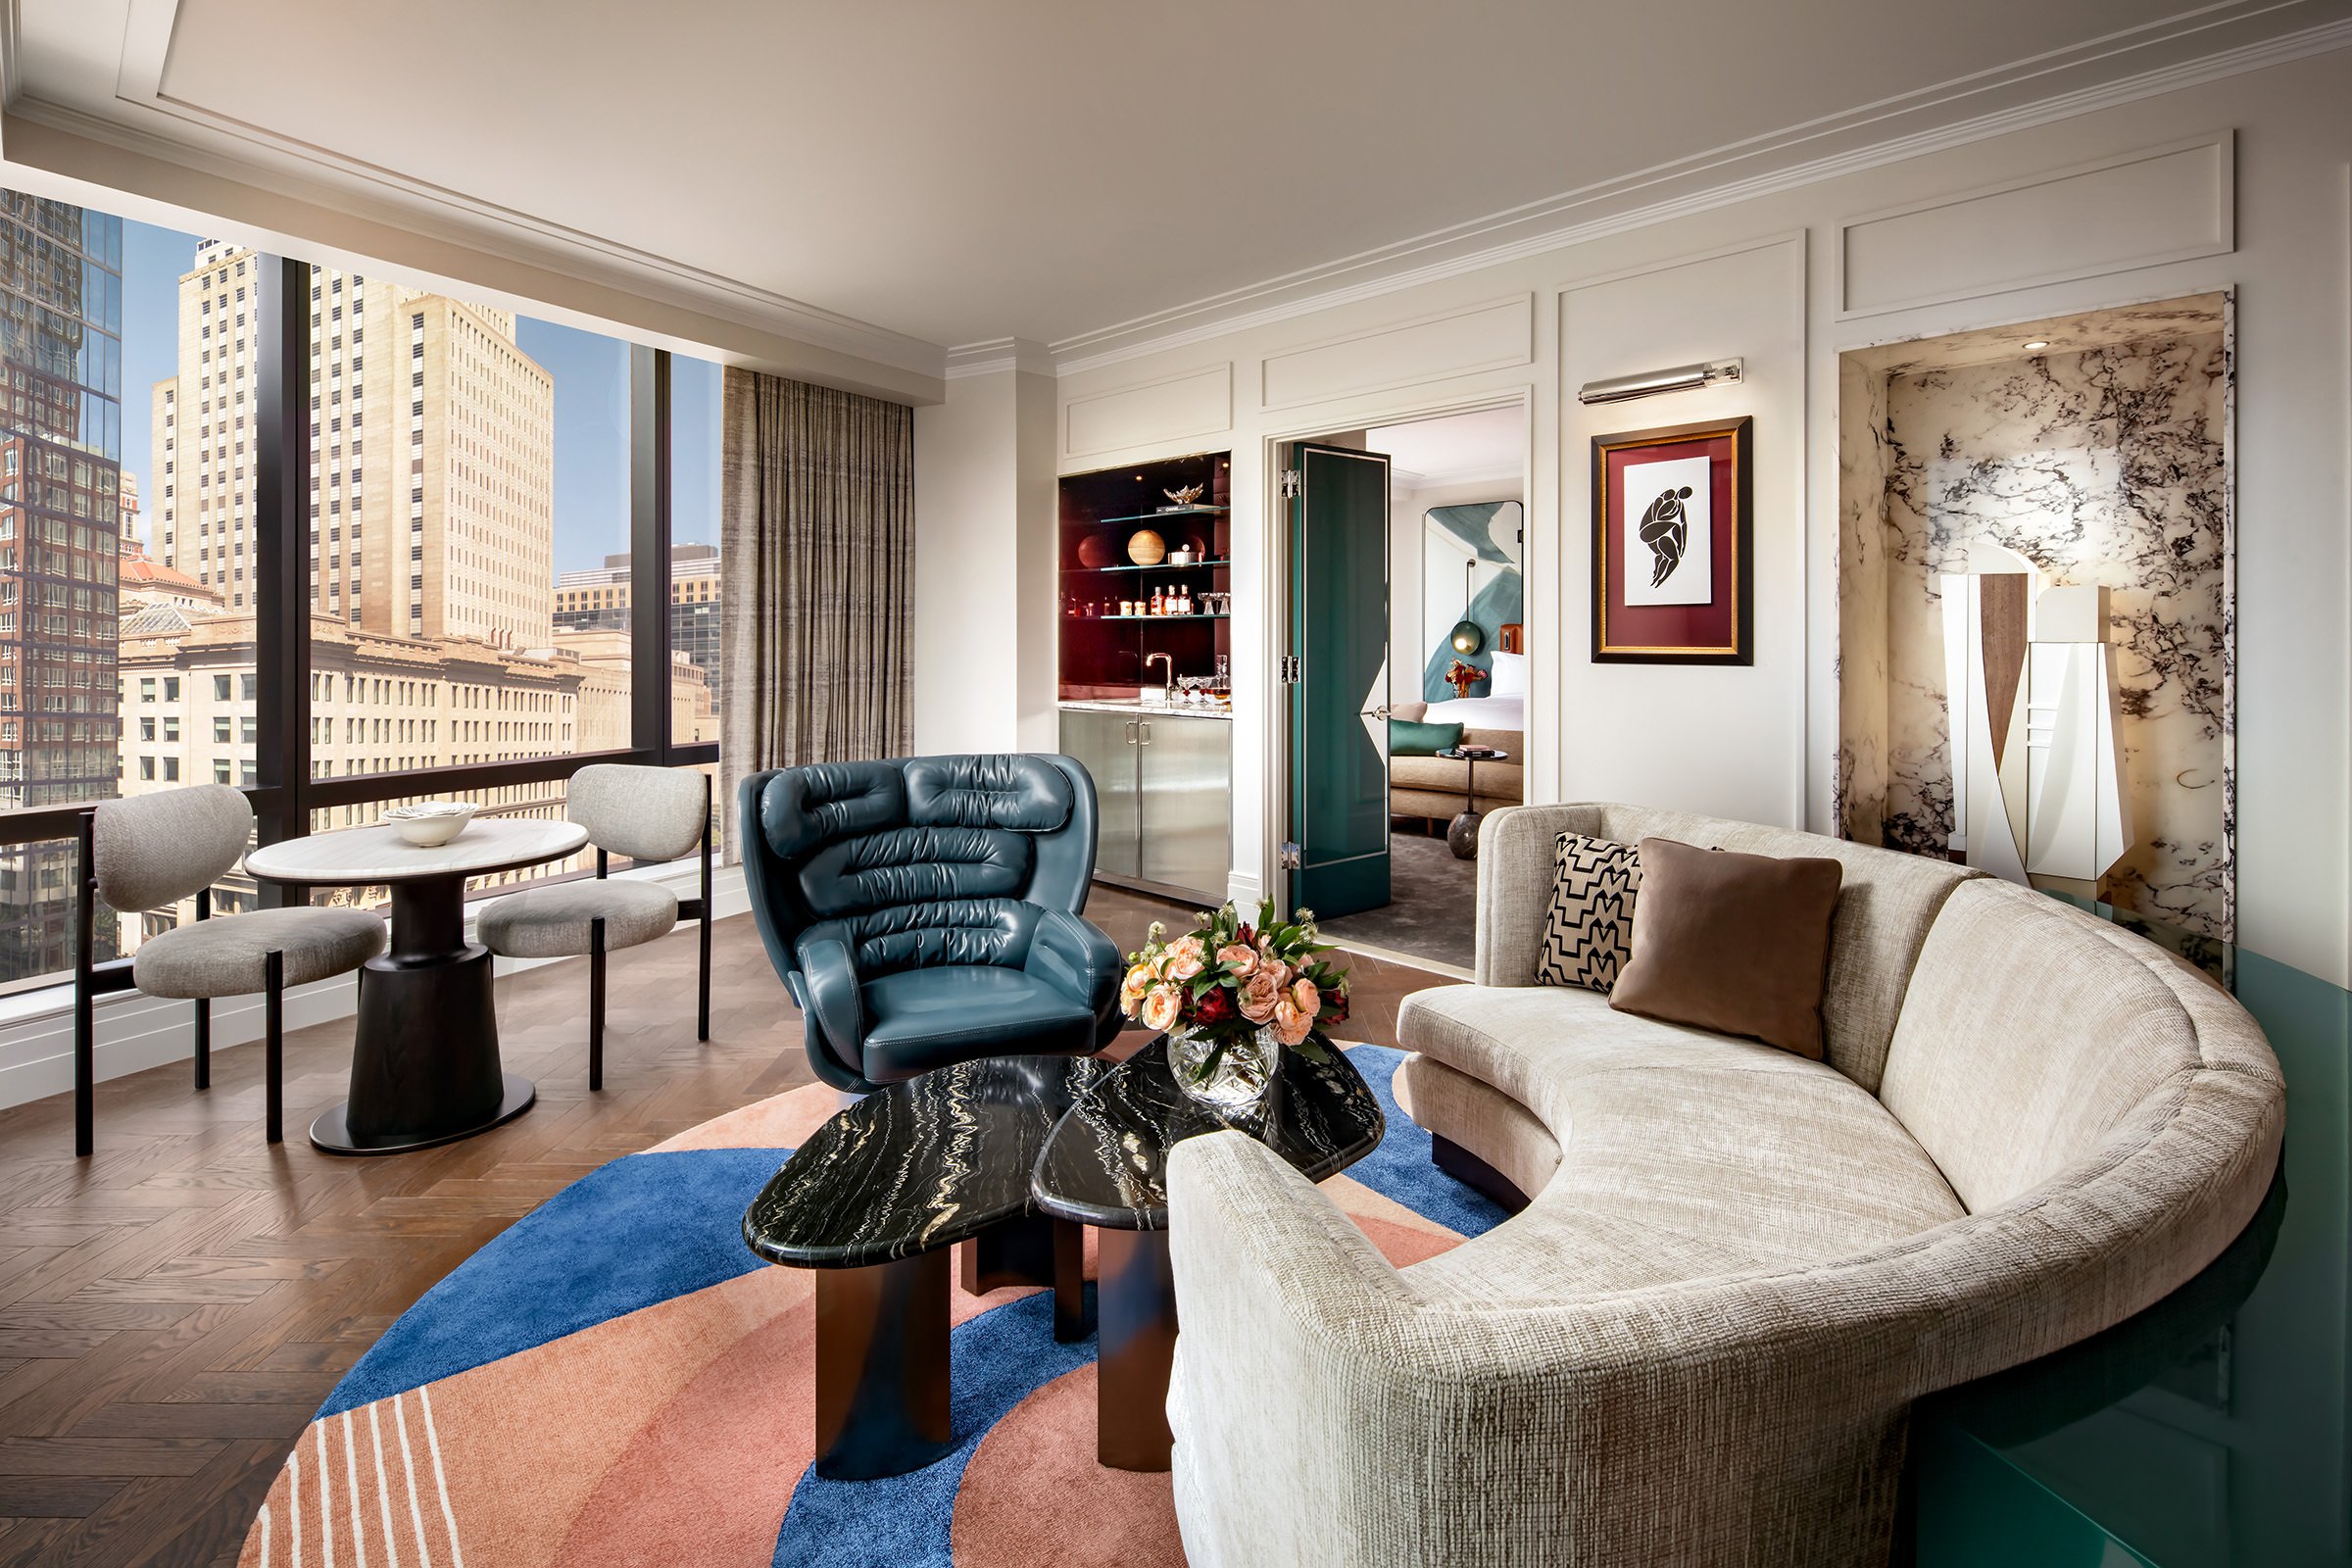 The living room of a premier suite at Raffles Boston hotel